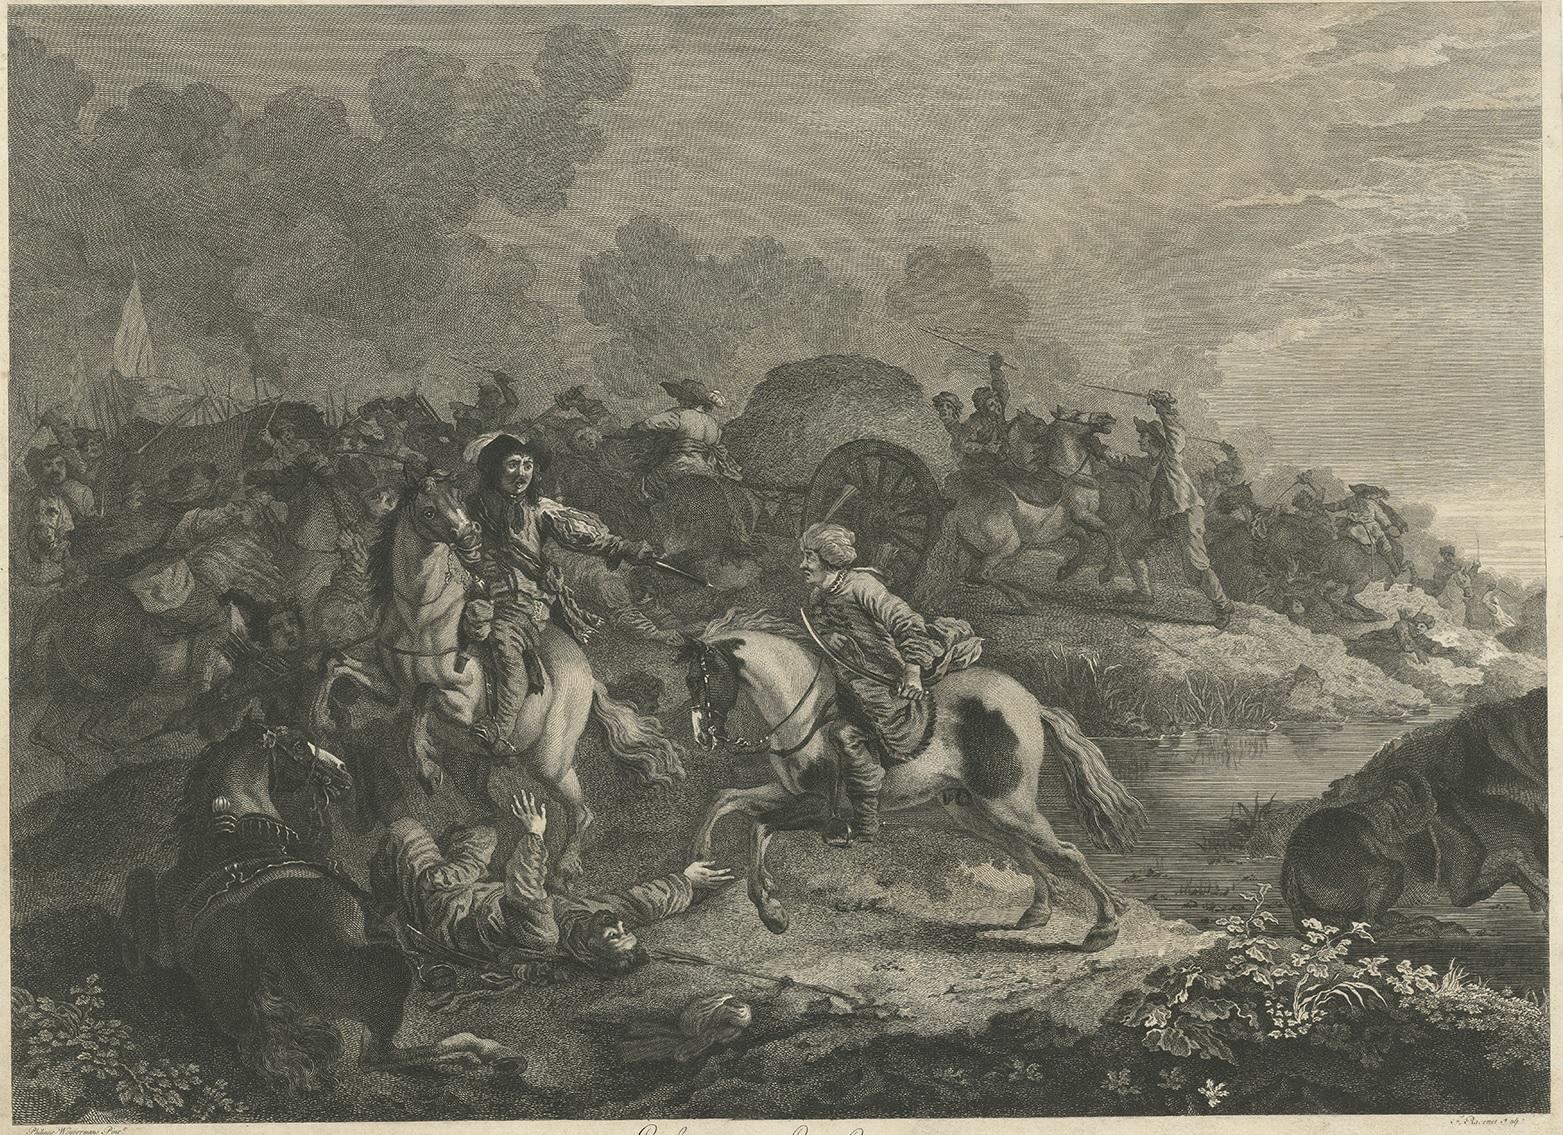 Antique print titled 'Enlevement dun Convoy'. Antique print of soldiers attacking an Ottoman convoy. In the foreground a cavalryman, whose rearing horse tramples a fallen foe, shoots at a turbaned soldier riding a galopping horse; beyond, a battle